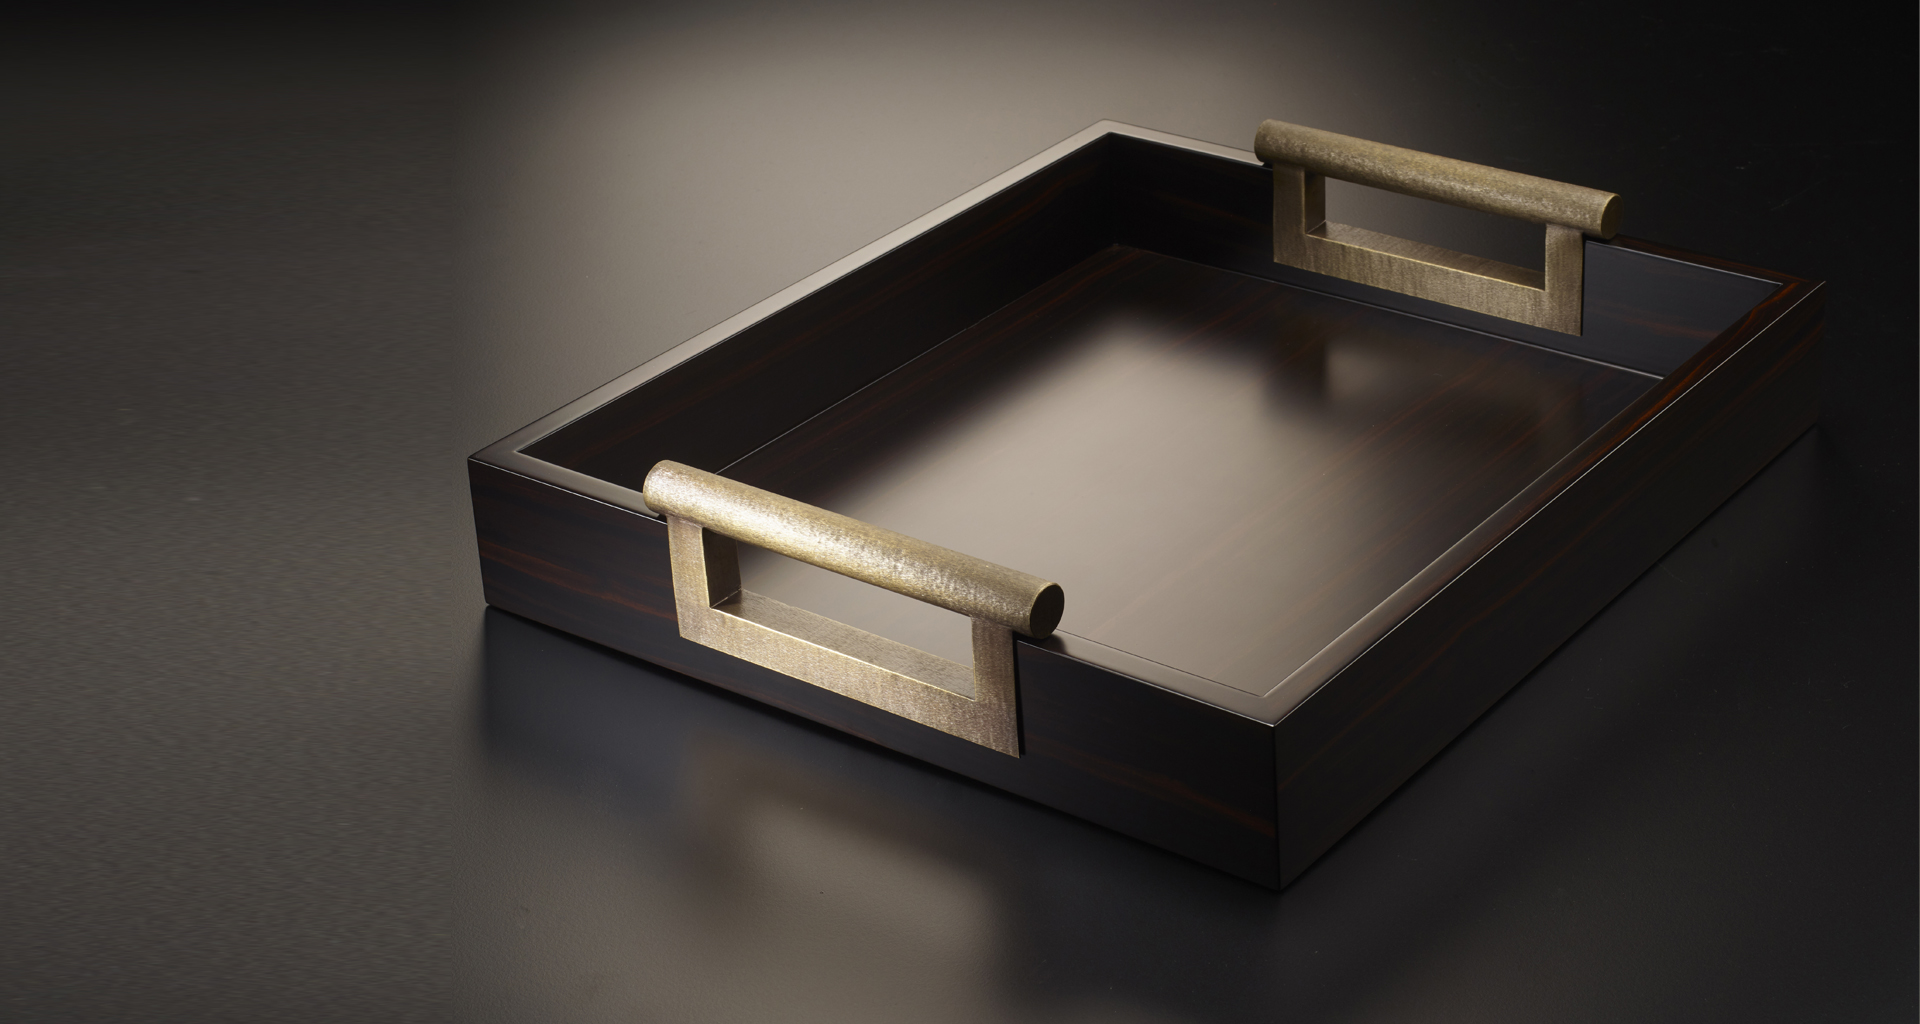 Alfred is a wooden tray with bronze handles, from Promemoria's catalogue | Promemoria